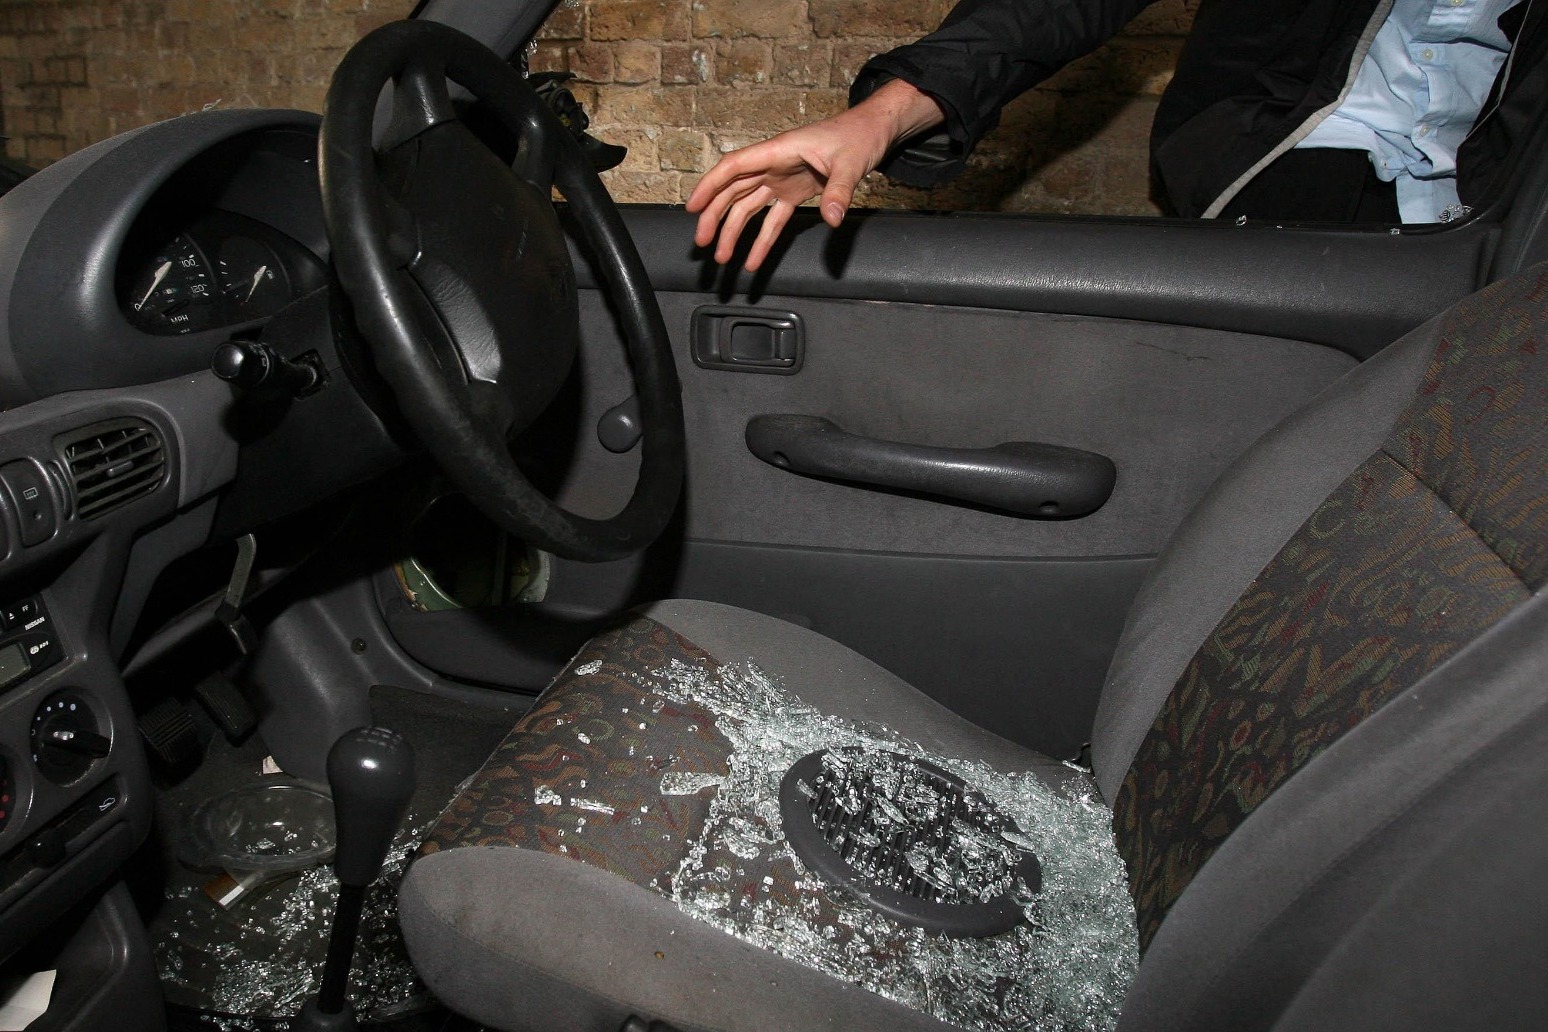 Vehicle thefts increase by 56% in four years 